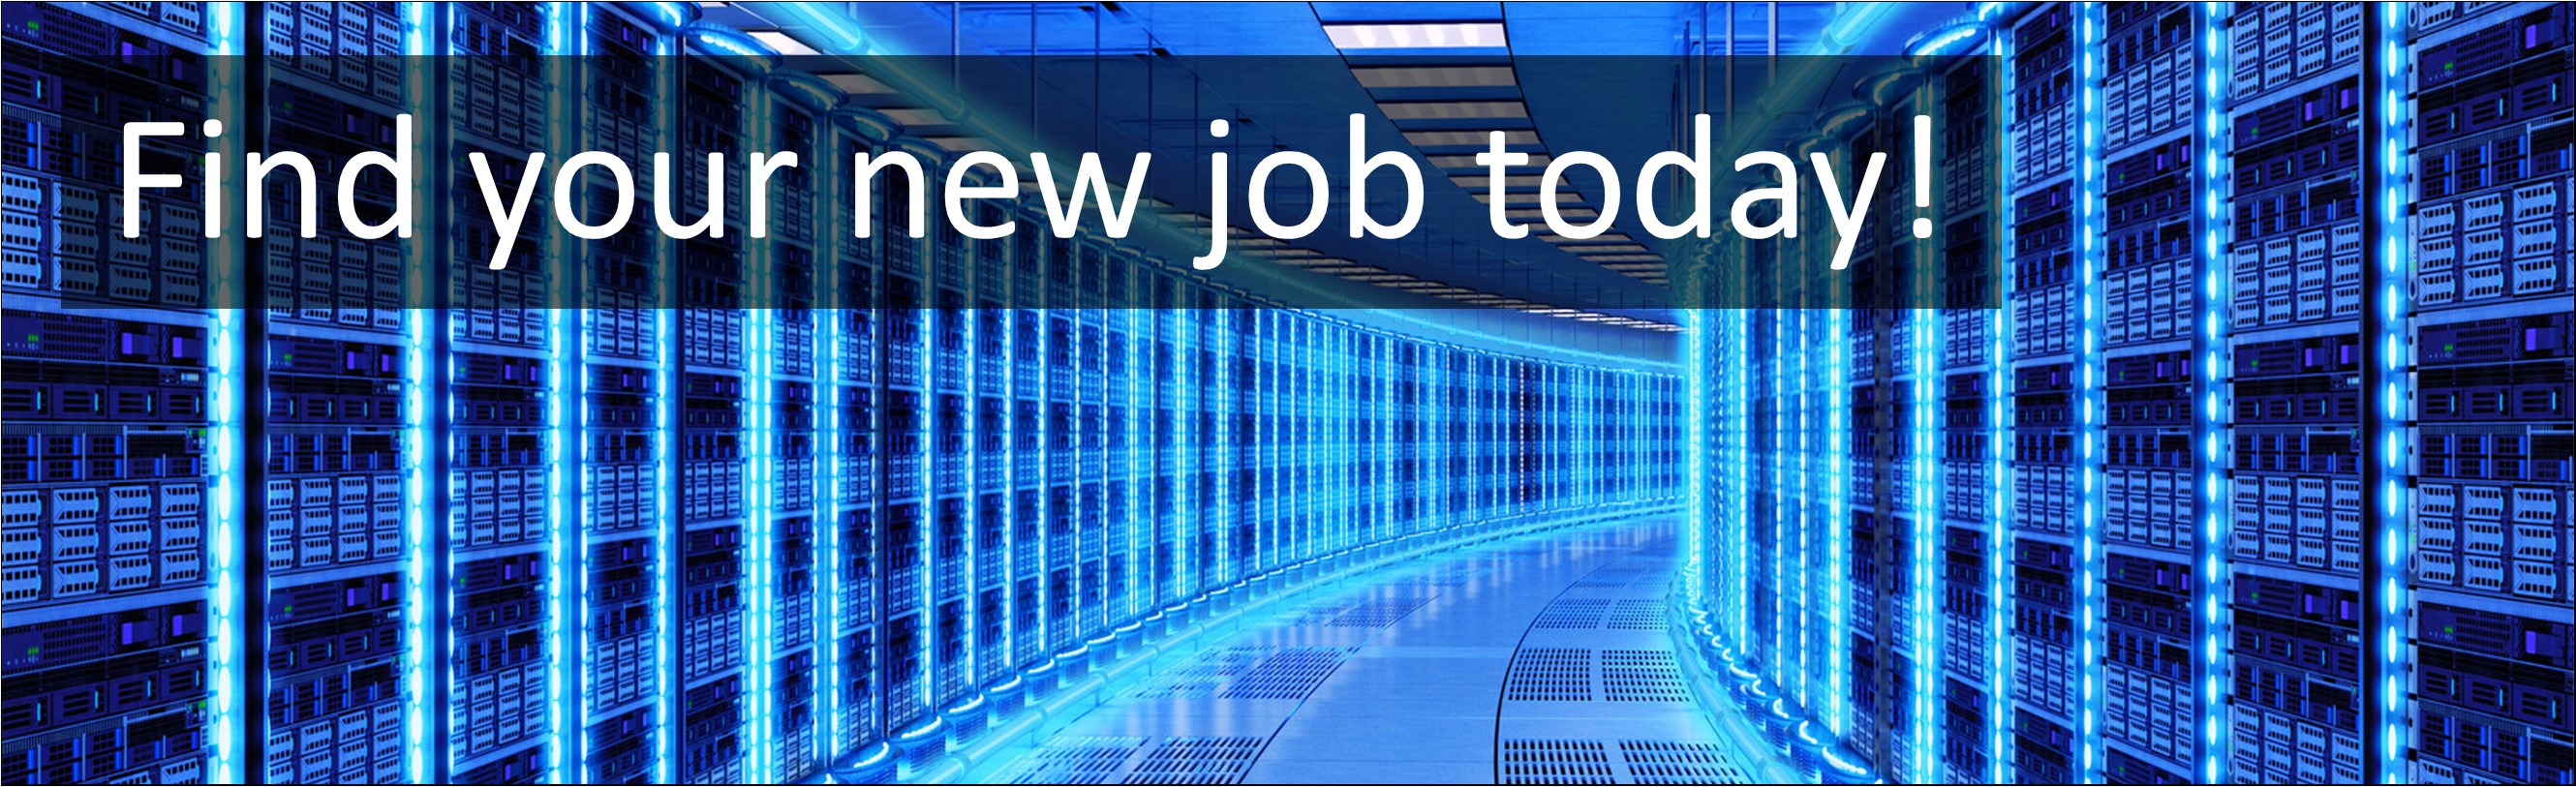 IT & Communication Jobs. Technical Support Engineer / IT Infrastructure Support Analyst Jobs, Careers & Vacancies in Leyland, Lancashire, North West England Advertised by AWD online – Multi-Job Board Advertising and CV Sourcing Recruitment Services